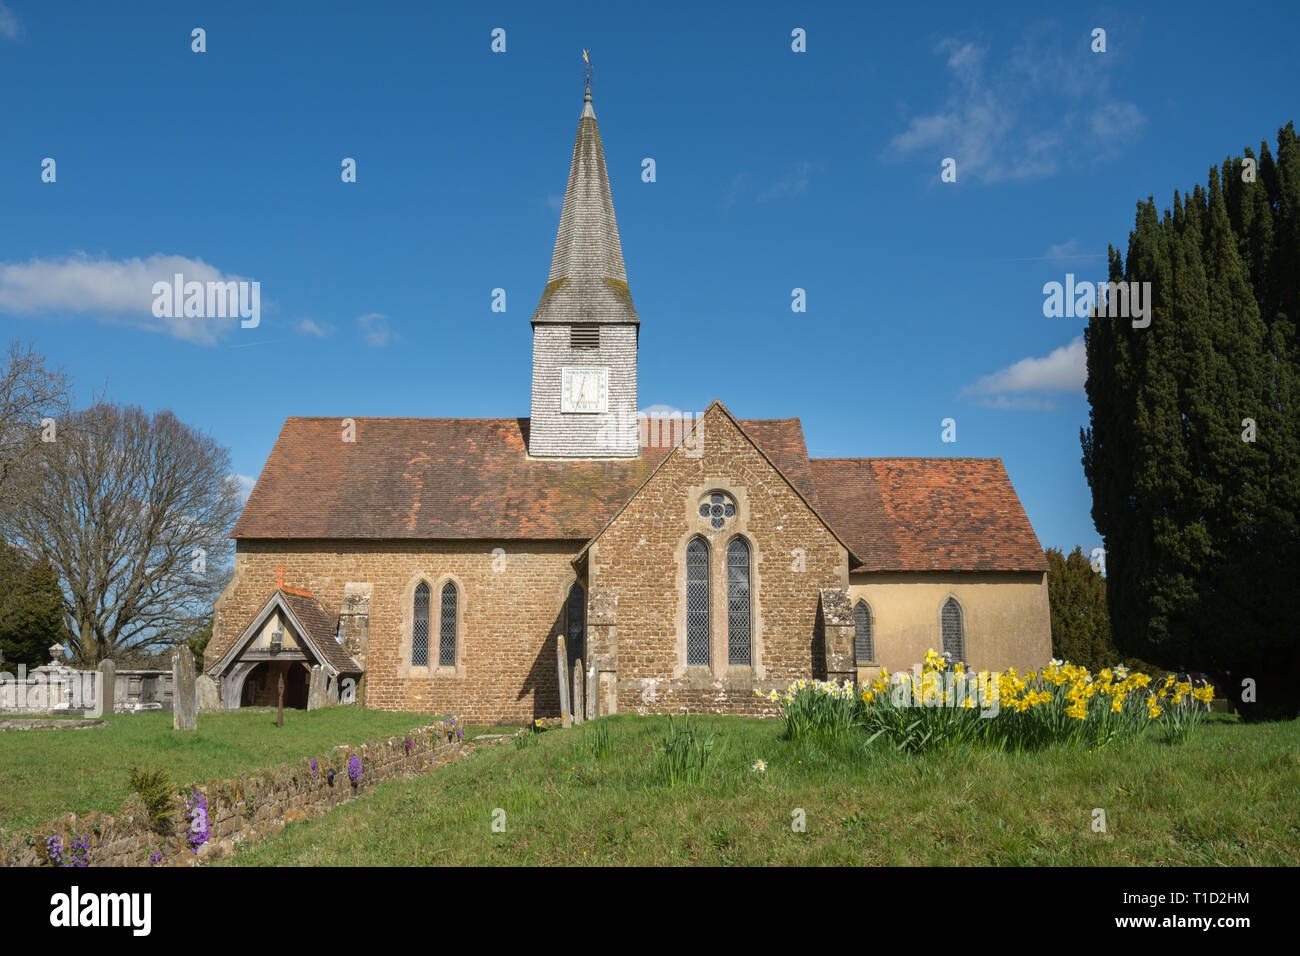 St Michael and All Angels parish church in the village of Thursley, Surrey, UK, on a sunny March day, with spring flowers daffodils Stock Photo